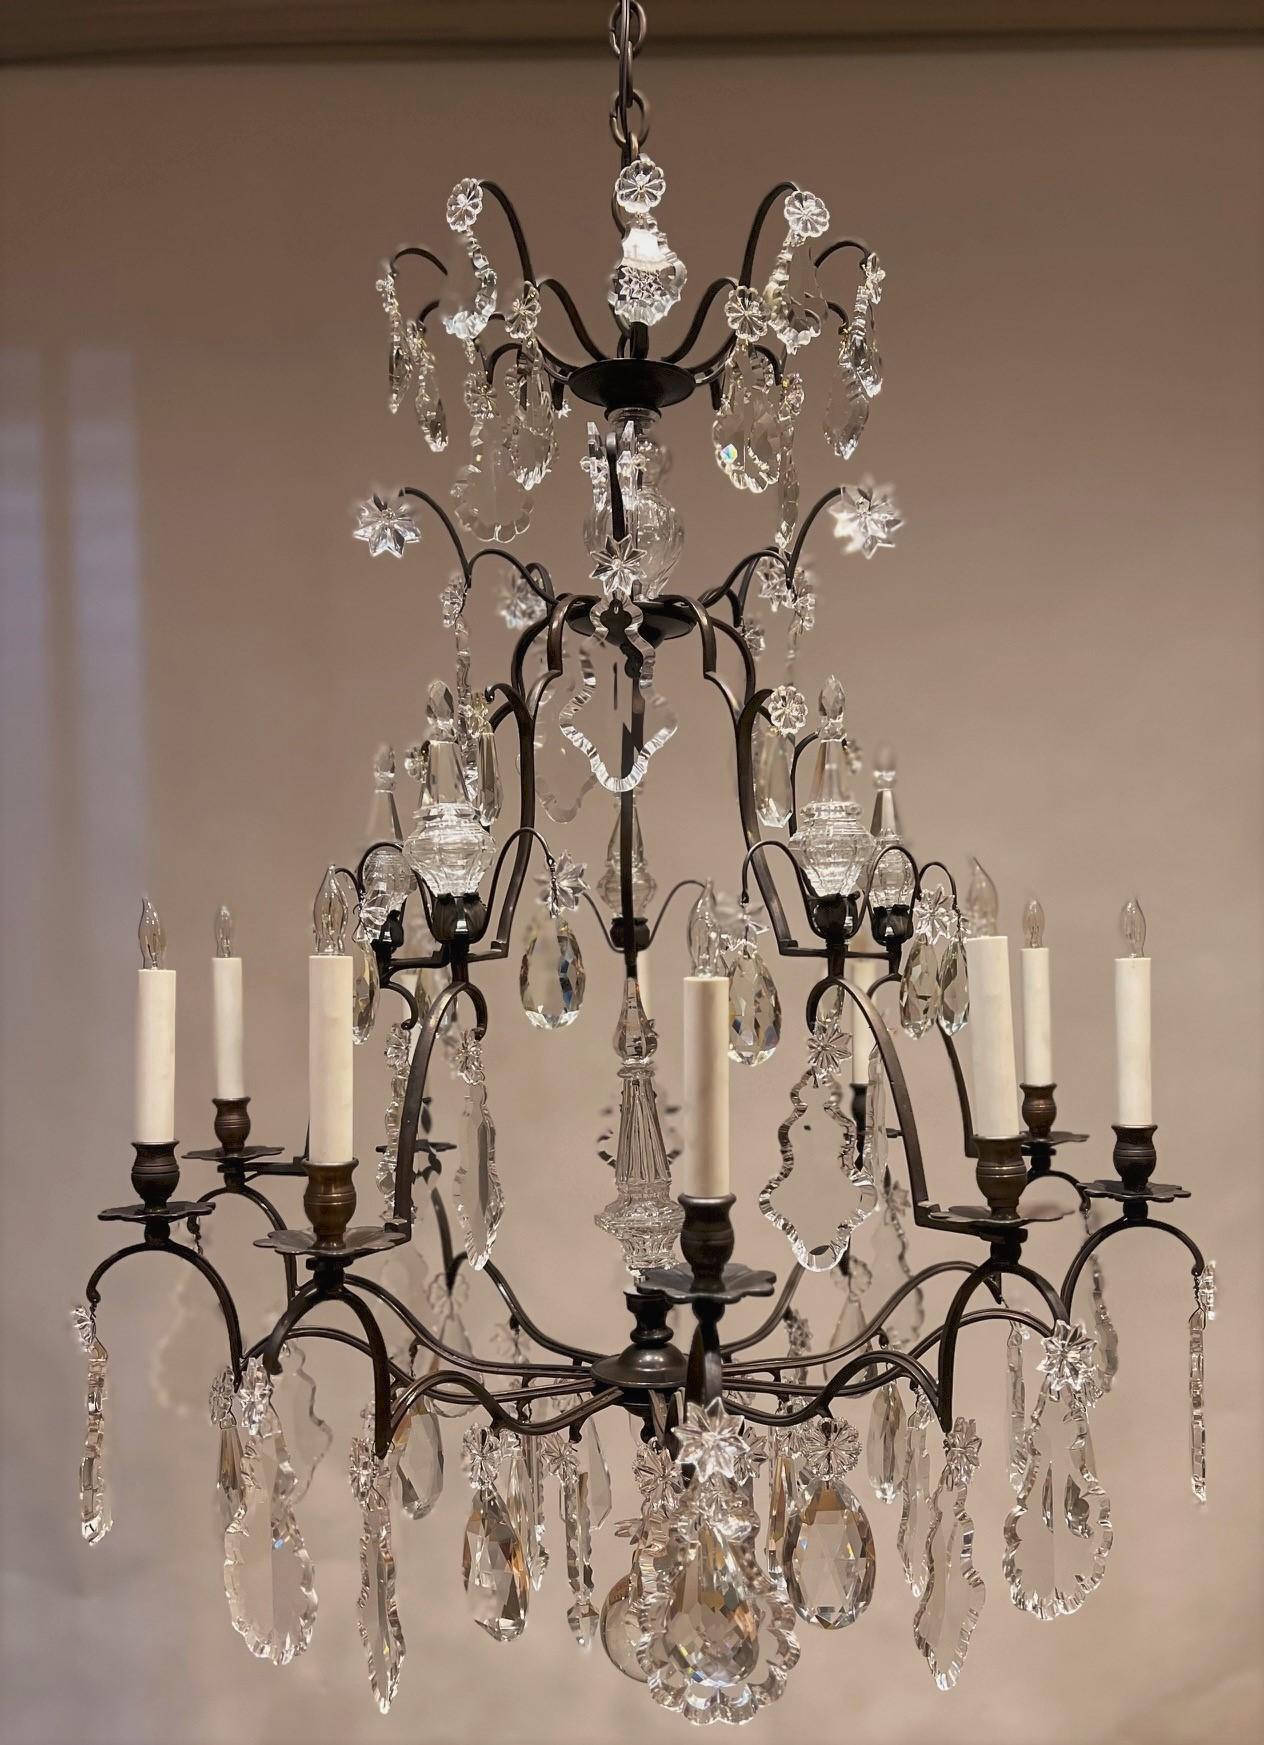 The amazing thing about this fixture is that, in spite of its size and the number of lights, its open design gives it a minimalist look. This Louis XV style ten-light chandelier, circa 1920 -- France, has a very graceful open hand-wrought bronze